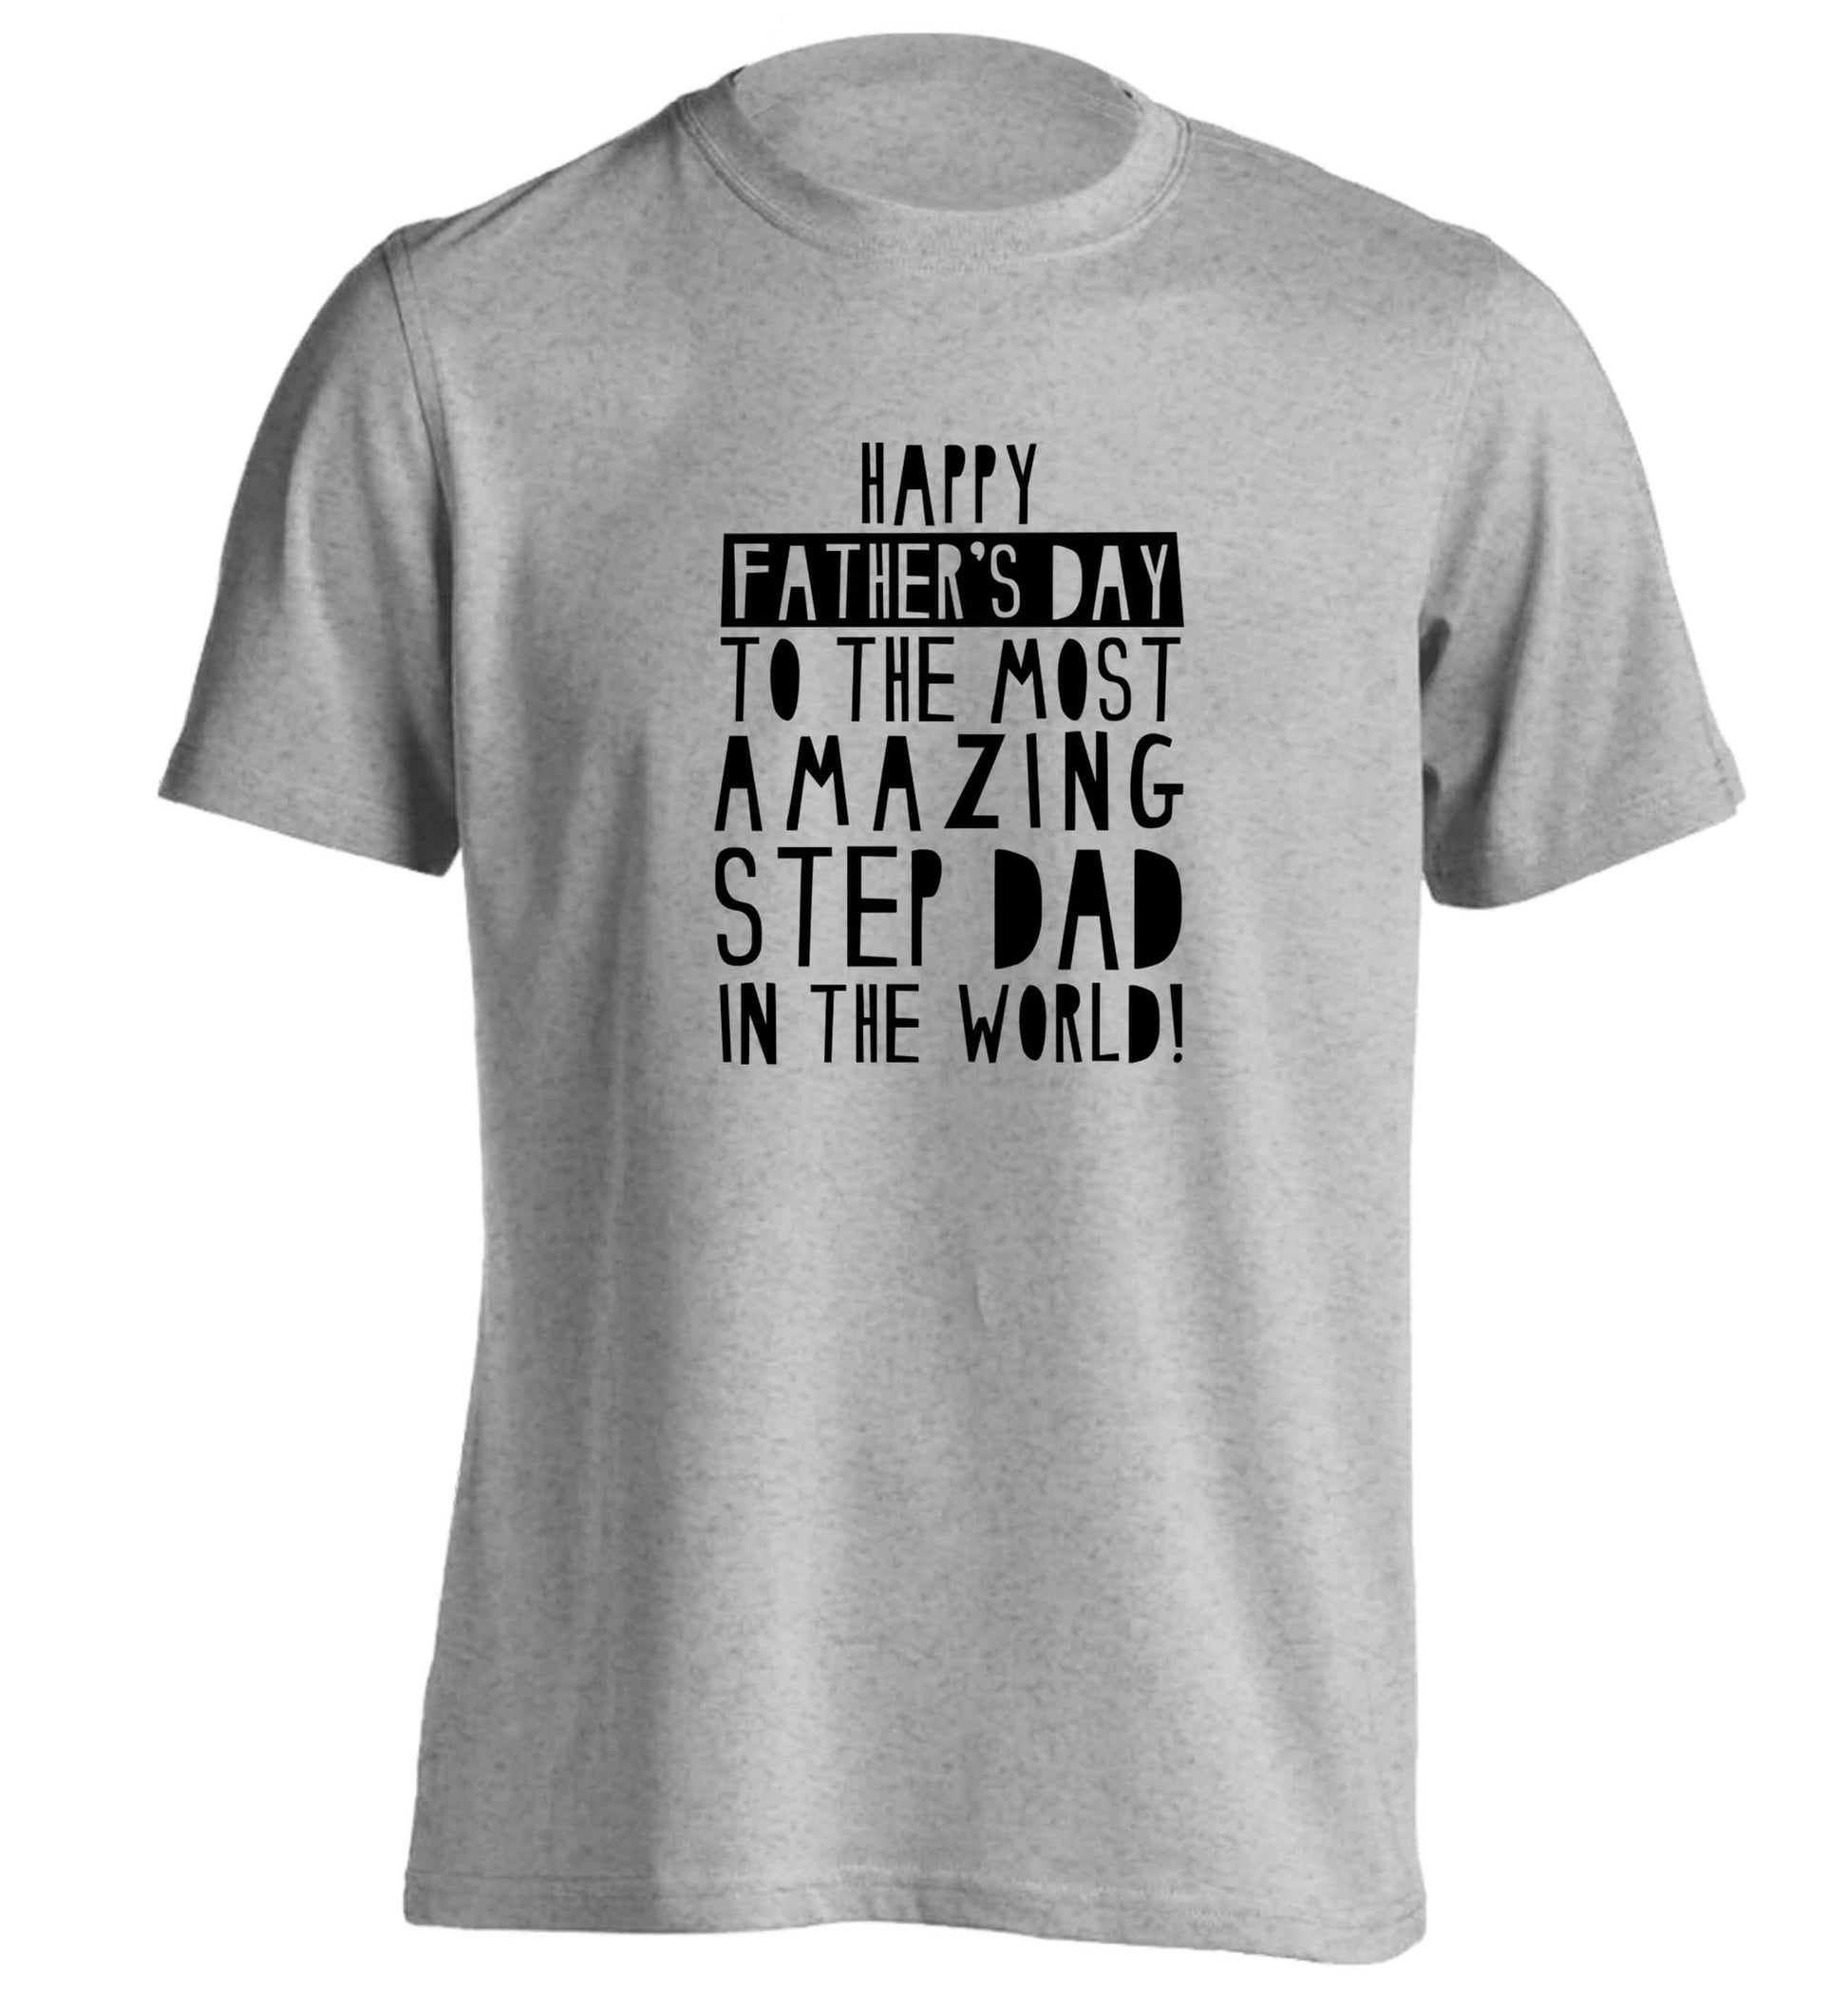 Happy Father's day to the best step dad in the world adults unisex grey Tshirt 2XL